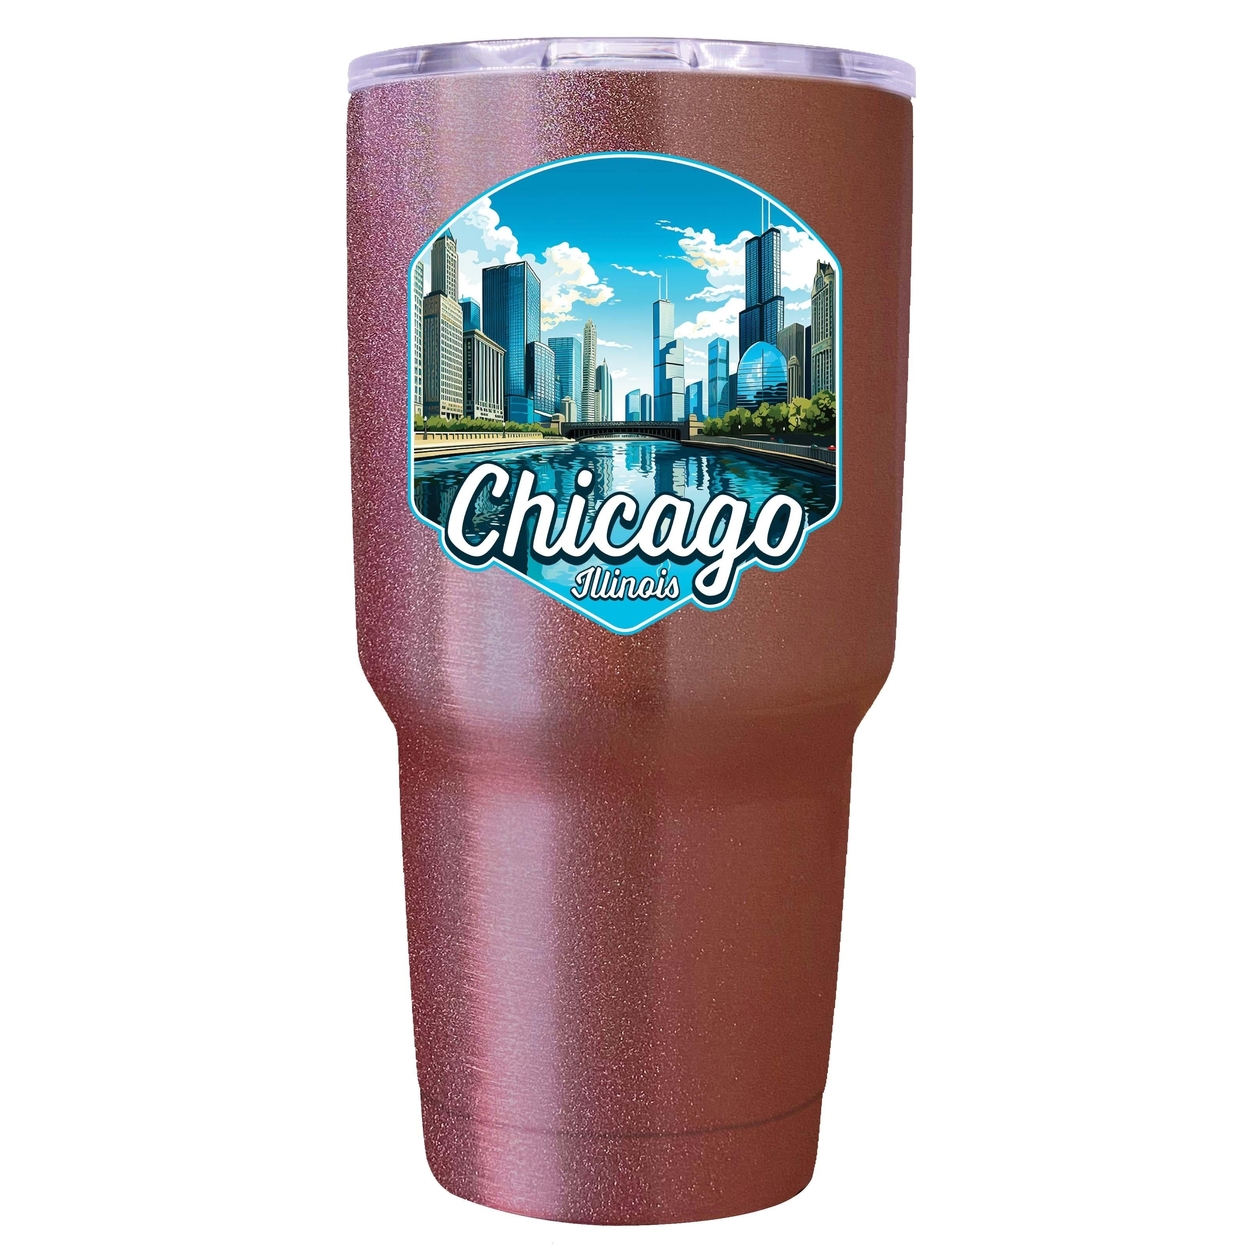 Chicago Illinois A Souvenir 24 Oz Insulated Tumbler - Rose Gold,,4-Pack